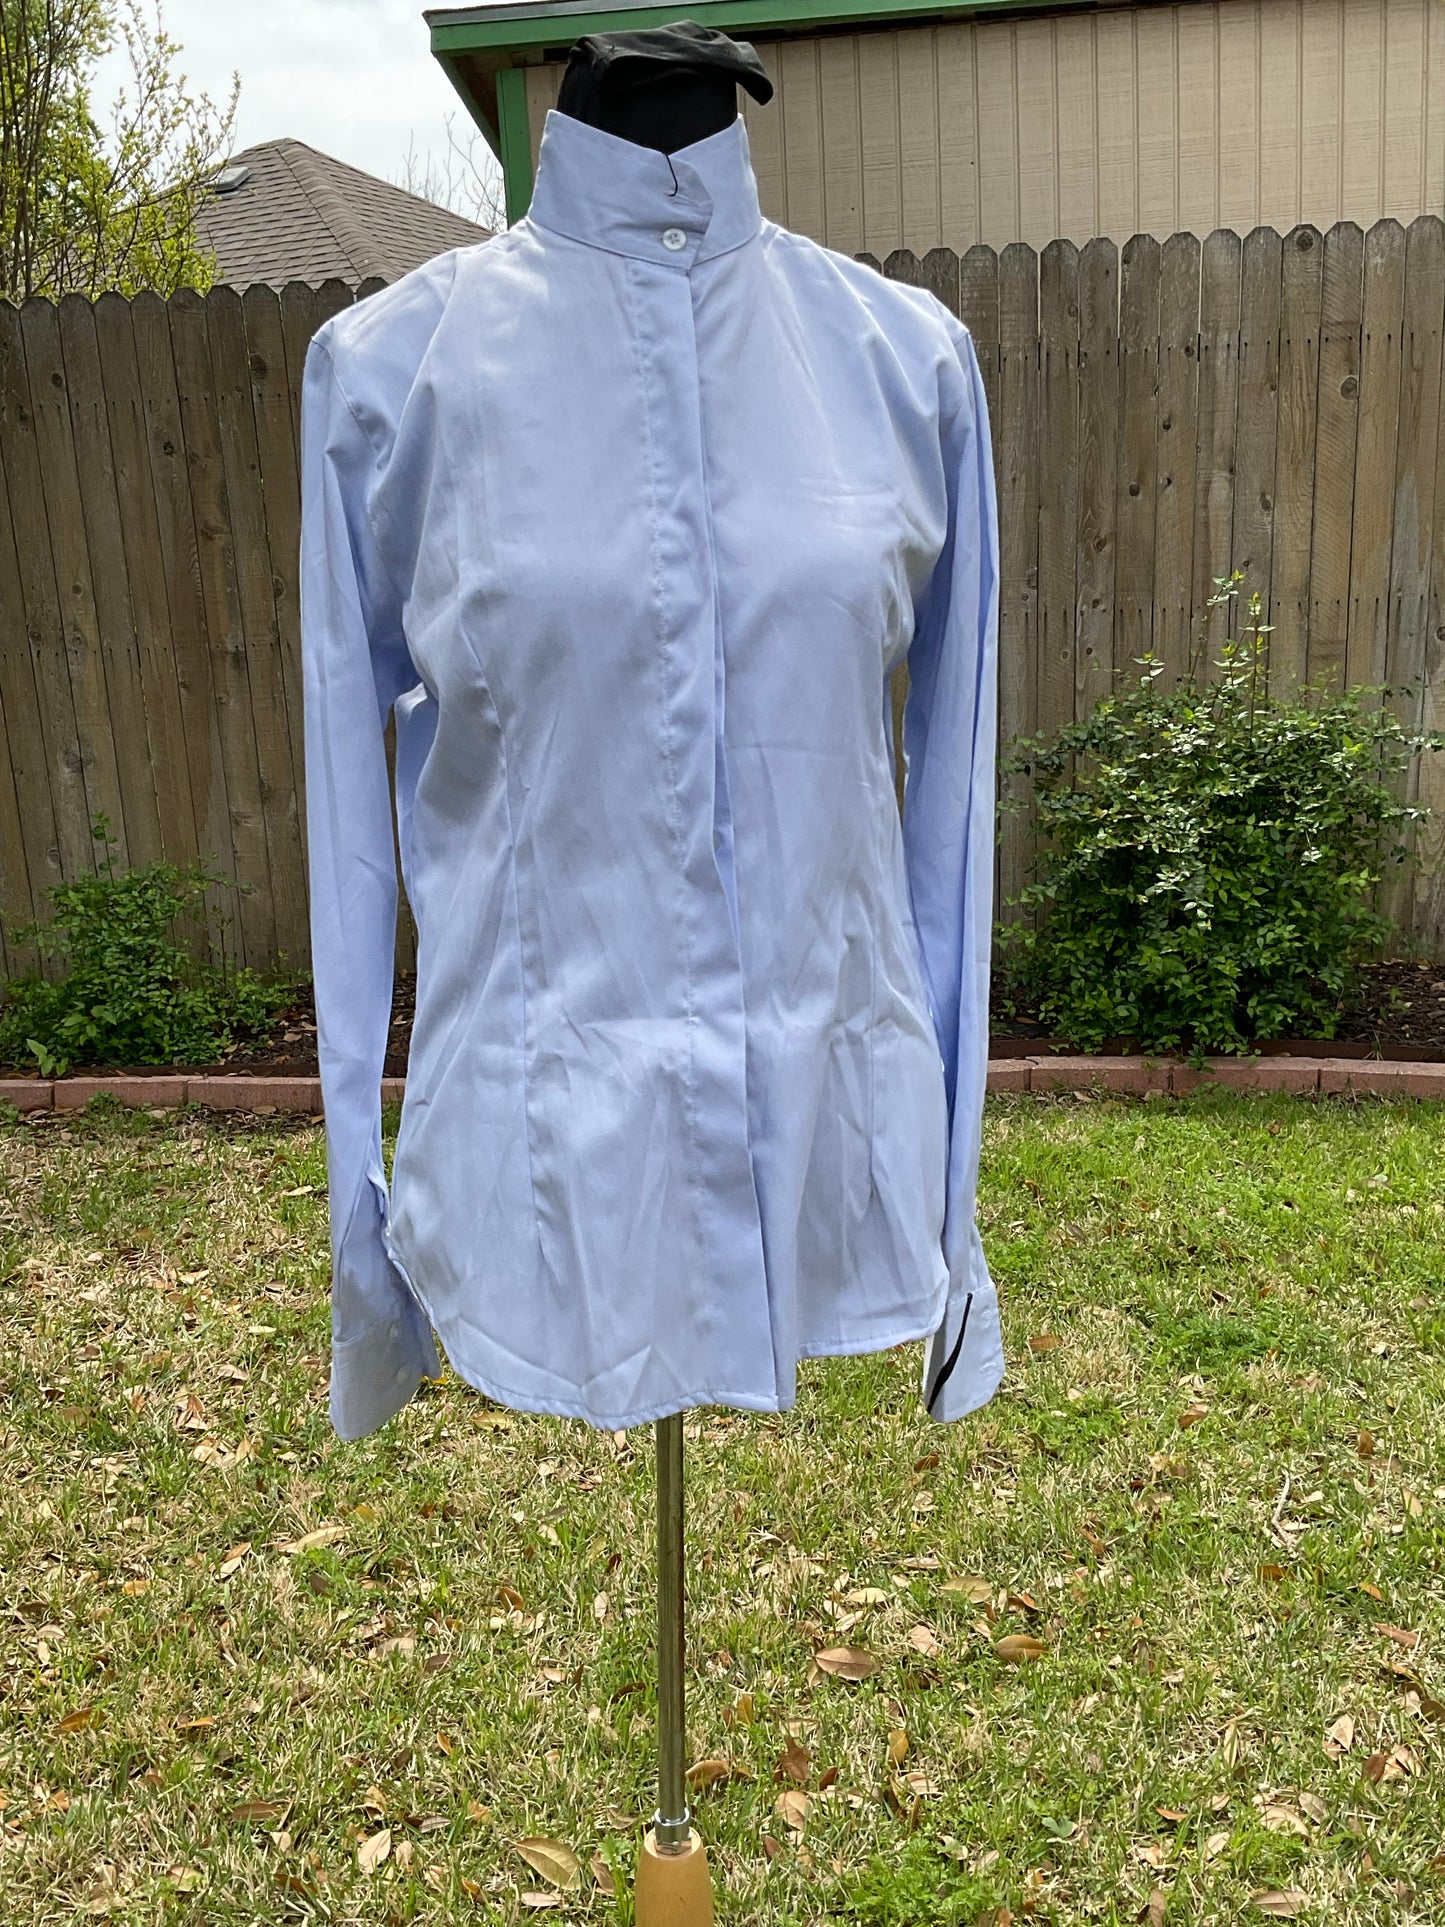 #1920 English Shirt Periwinkle with Purple